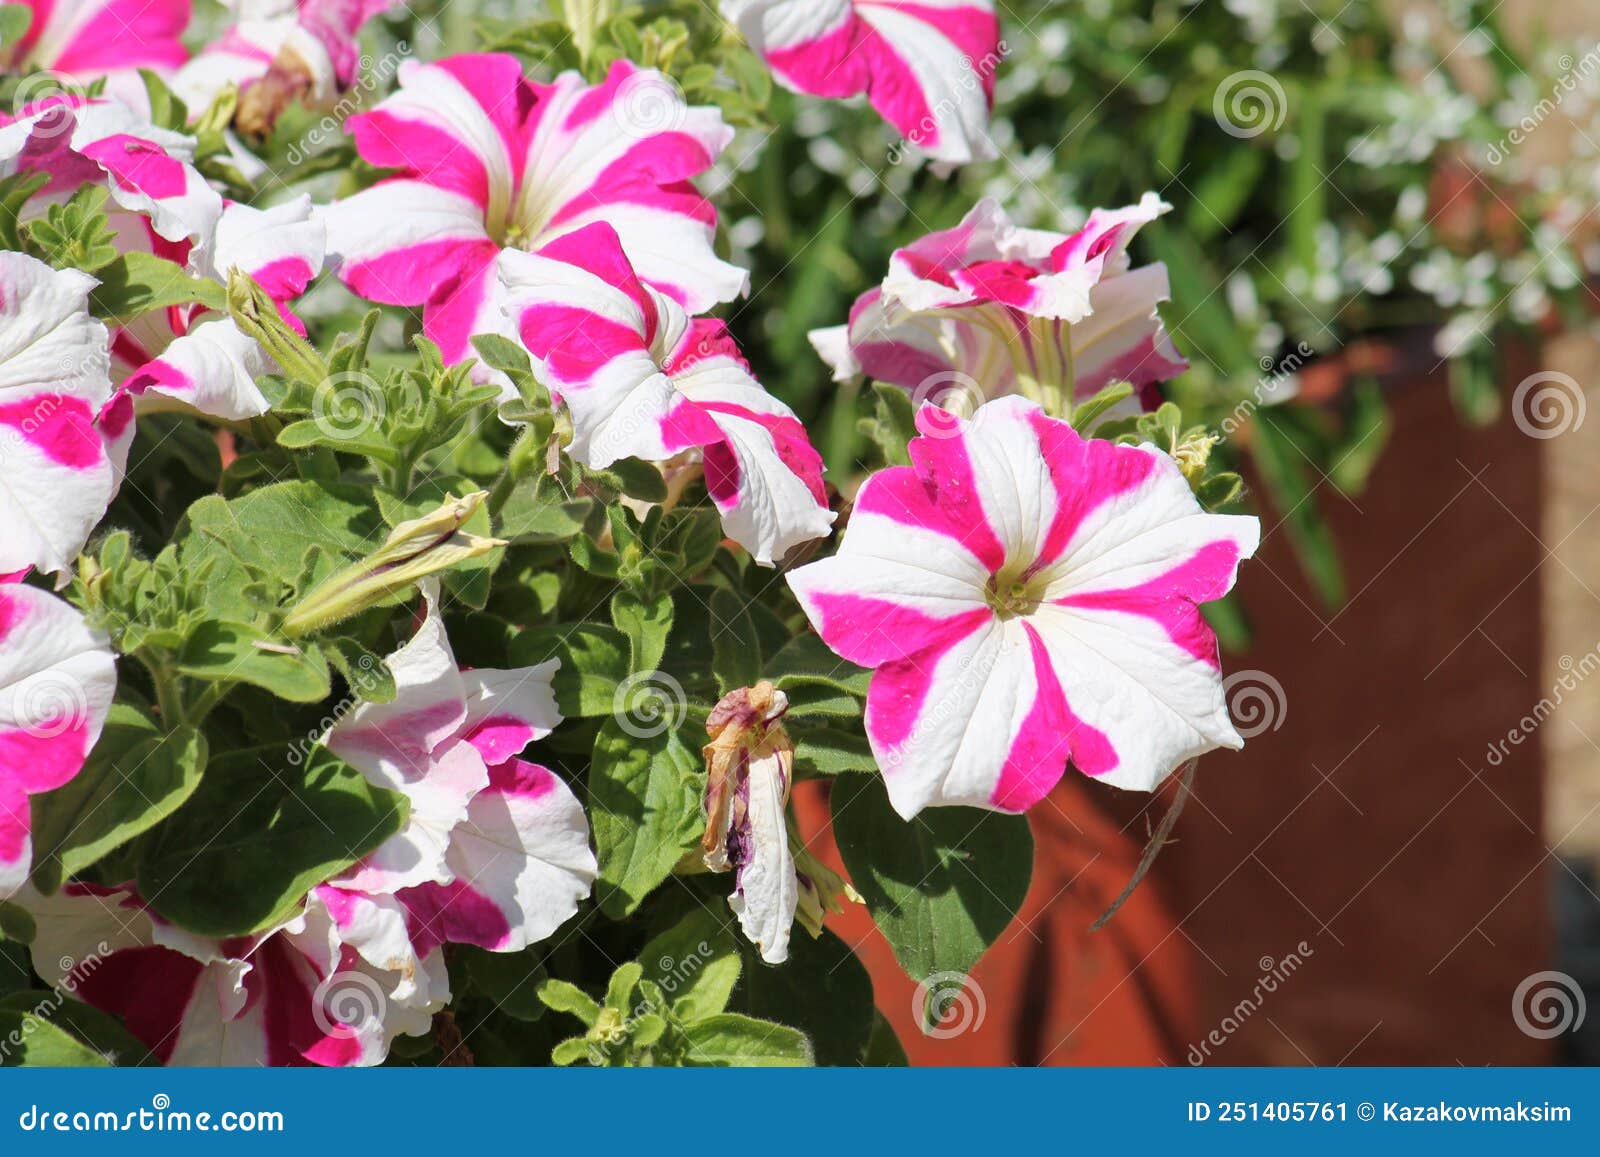 Striped Pink and White Flowers of Petunia Grandiflora Plant in Garden ...